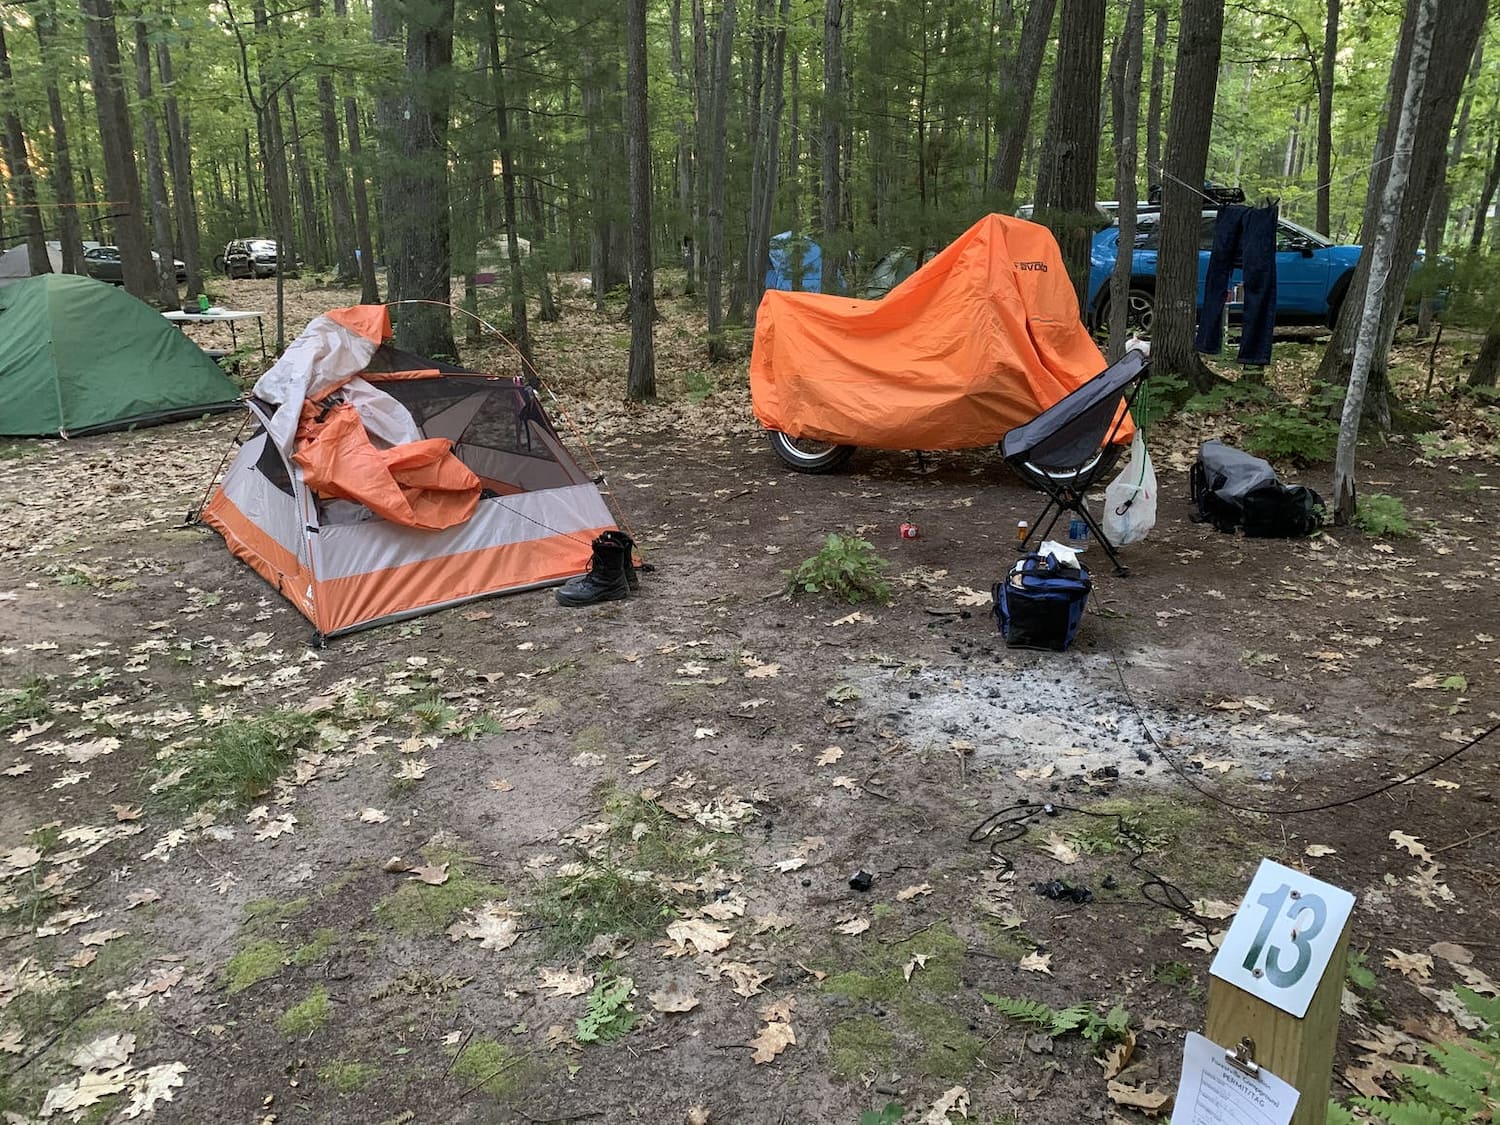 tent and motorcycle at campsite